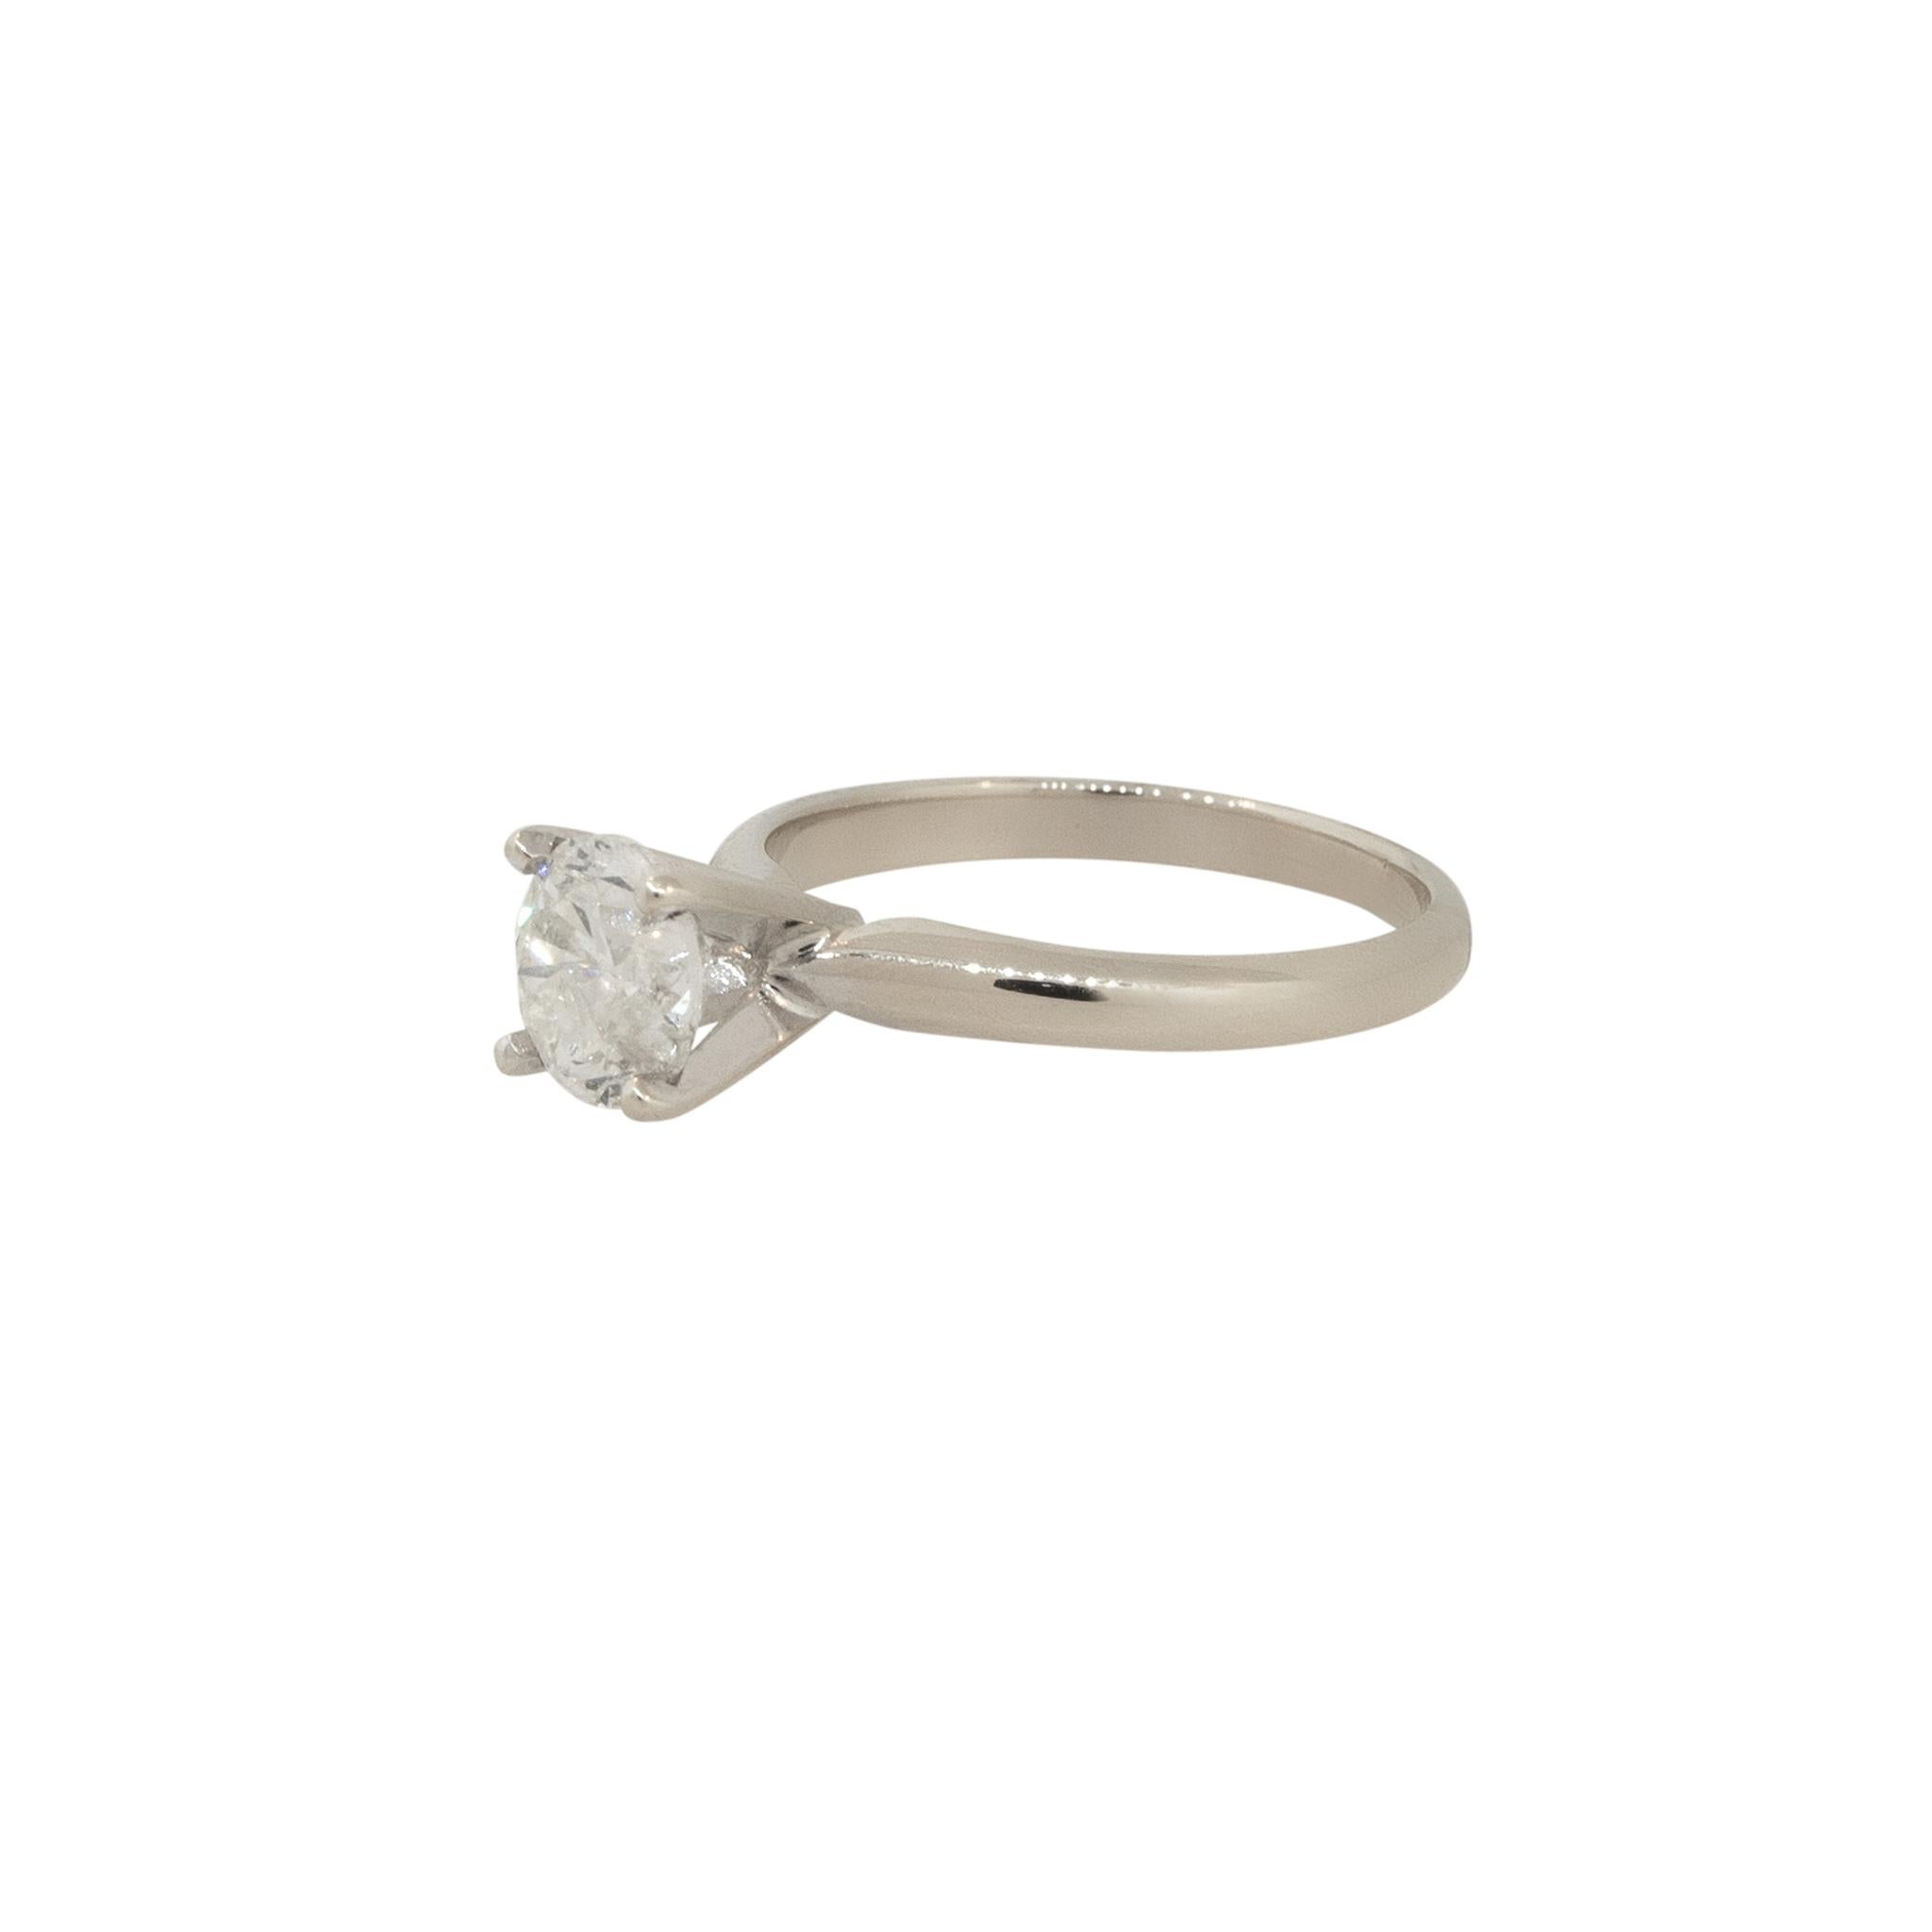 Raymond Lee Jewelers in Boca Raton -- South Florida’s destination for diamonds, fine jewelry, antique jewelry, estate pieces, and vintage jewels.

Style: Women's 4 Prong Engagement Ring
Material: 14k White Gold
Diamond Details: Approximately 1.07ctw